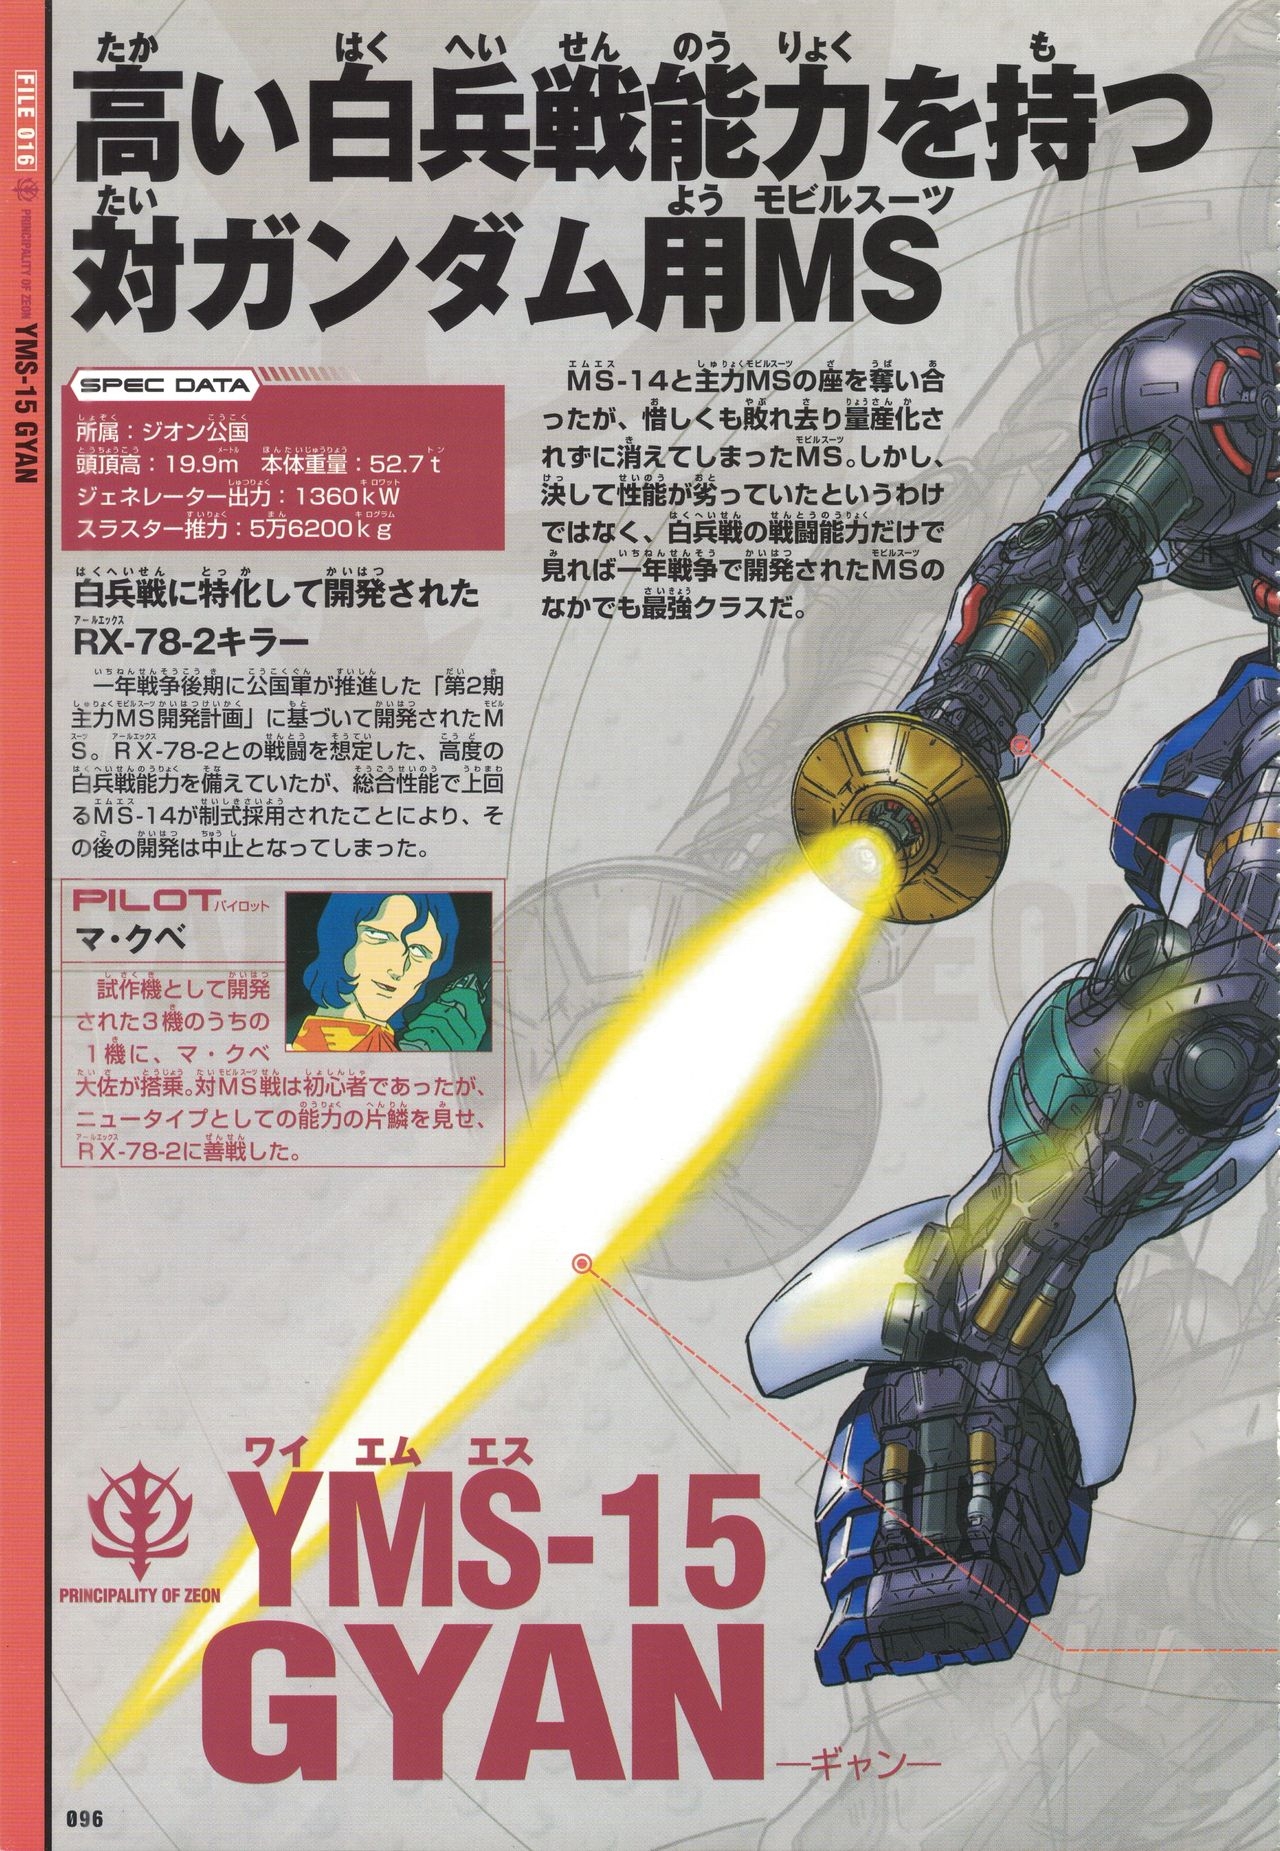 Mobile Suit Gundam - New Cross-Section Book - One Year War Edition 100